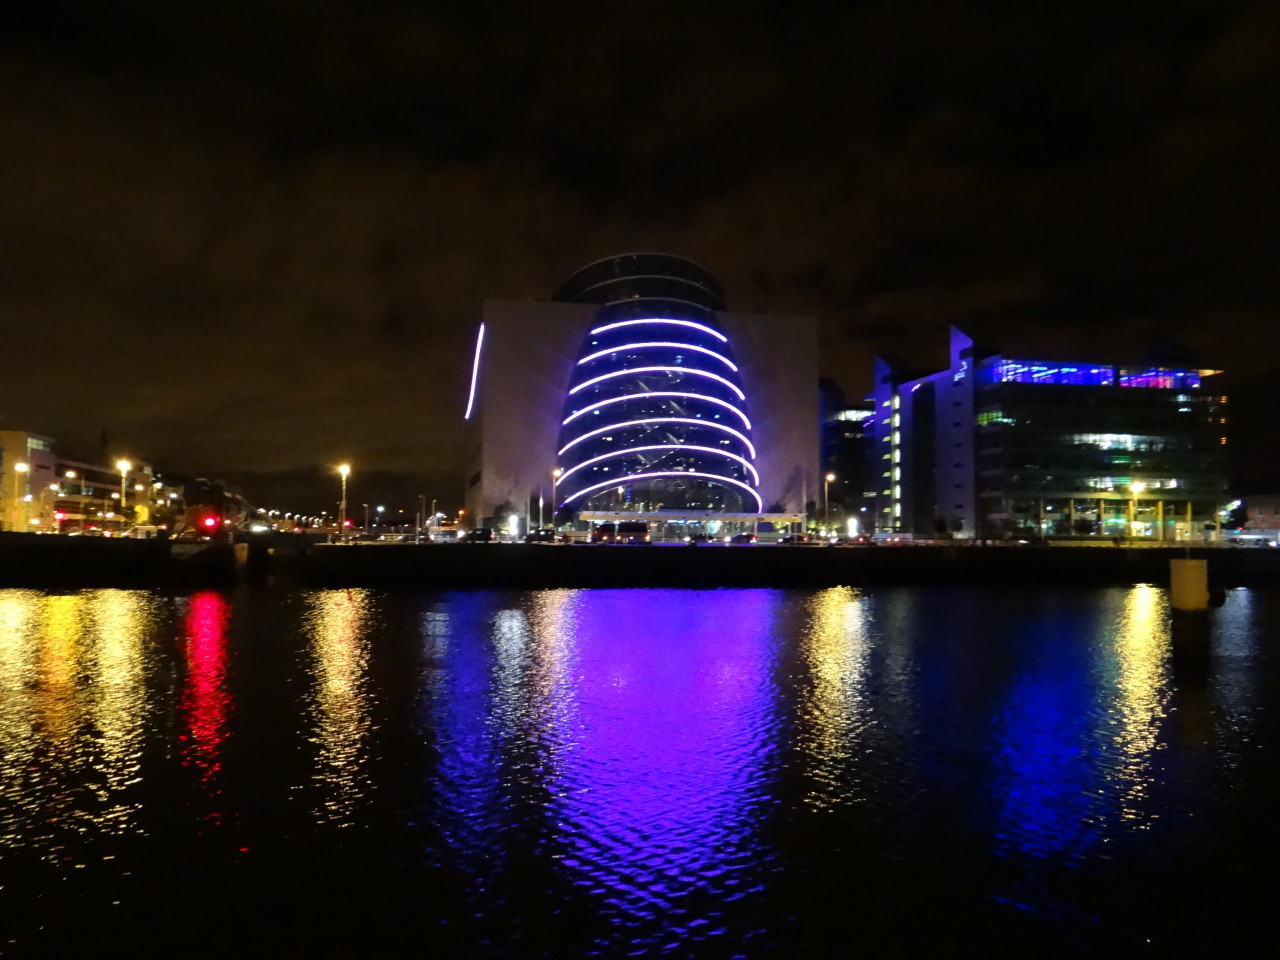 Dublin at Night - Convention Center colors reflected on the Liffey River